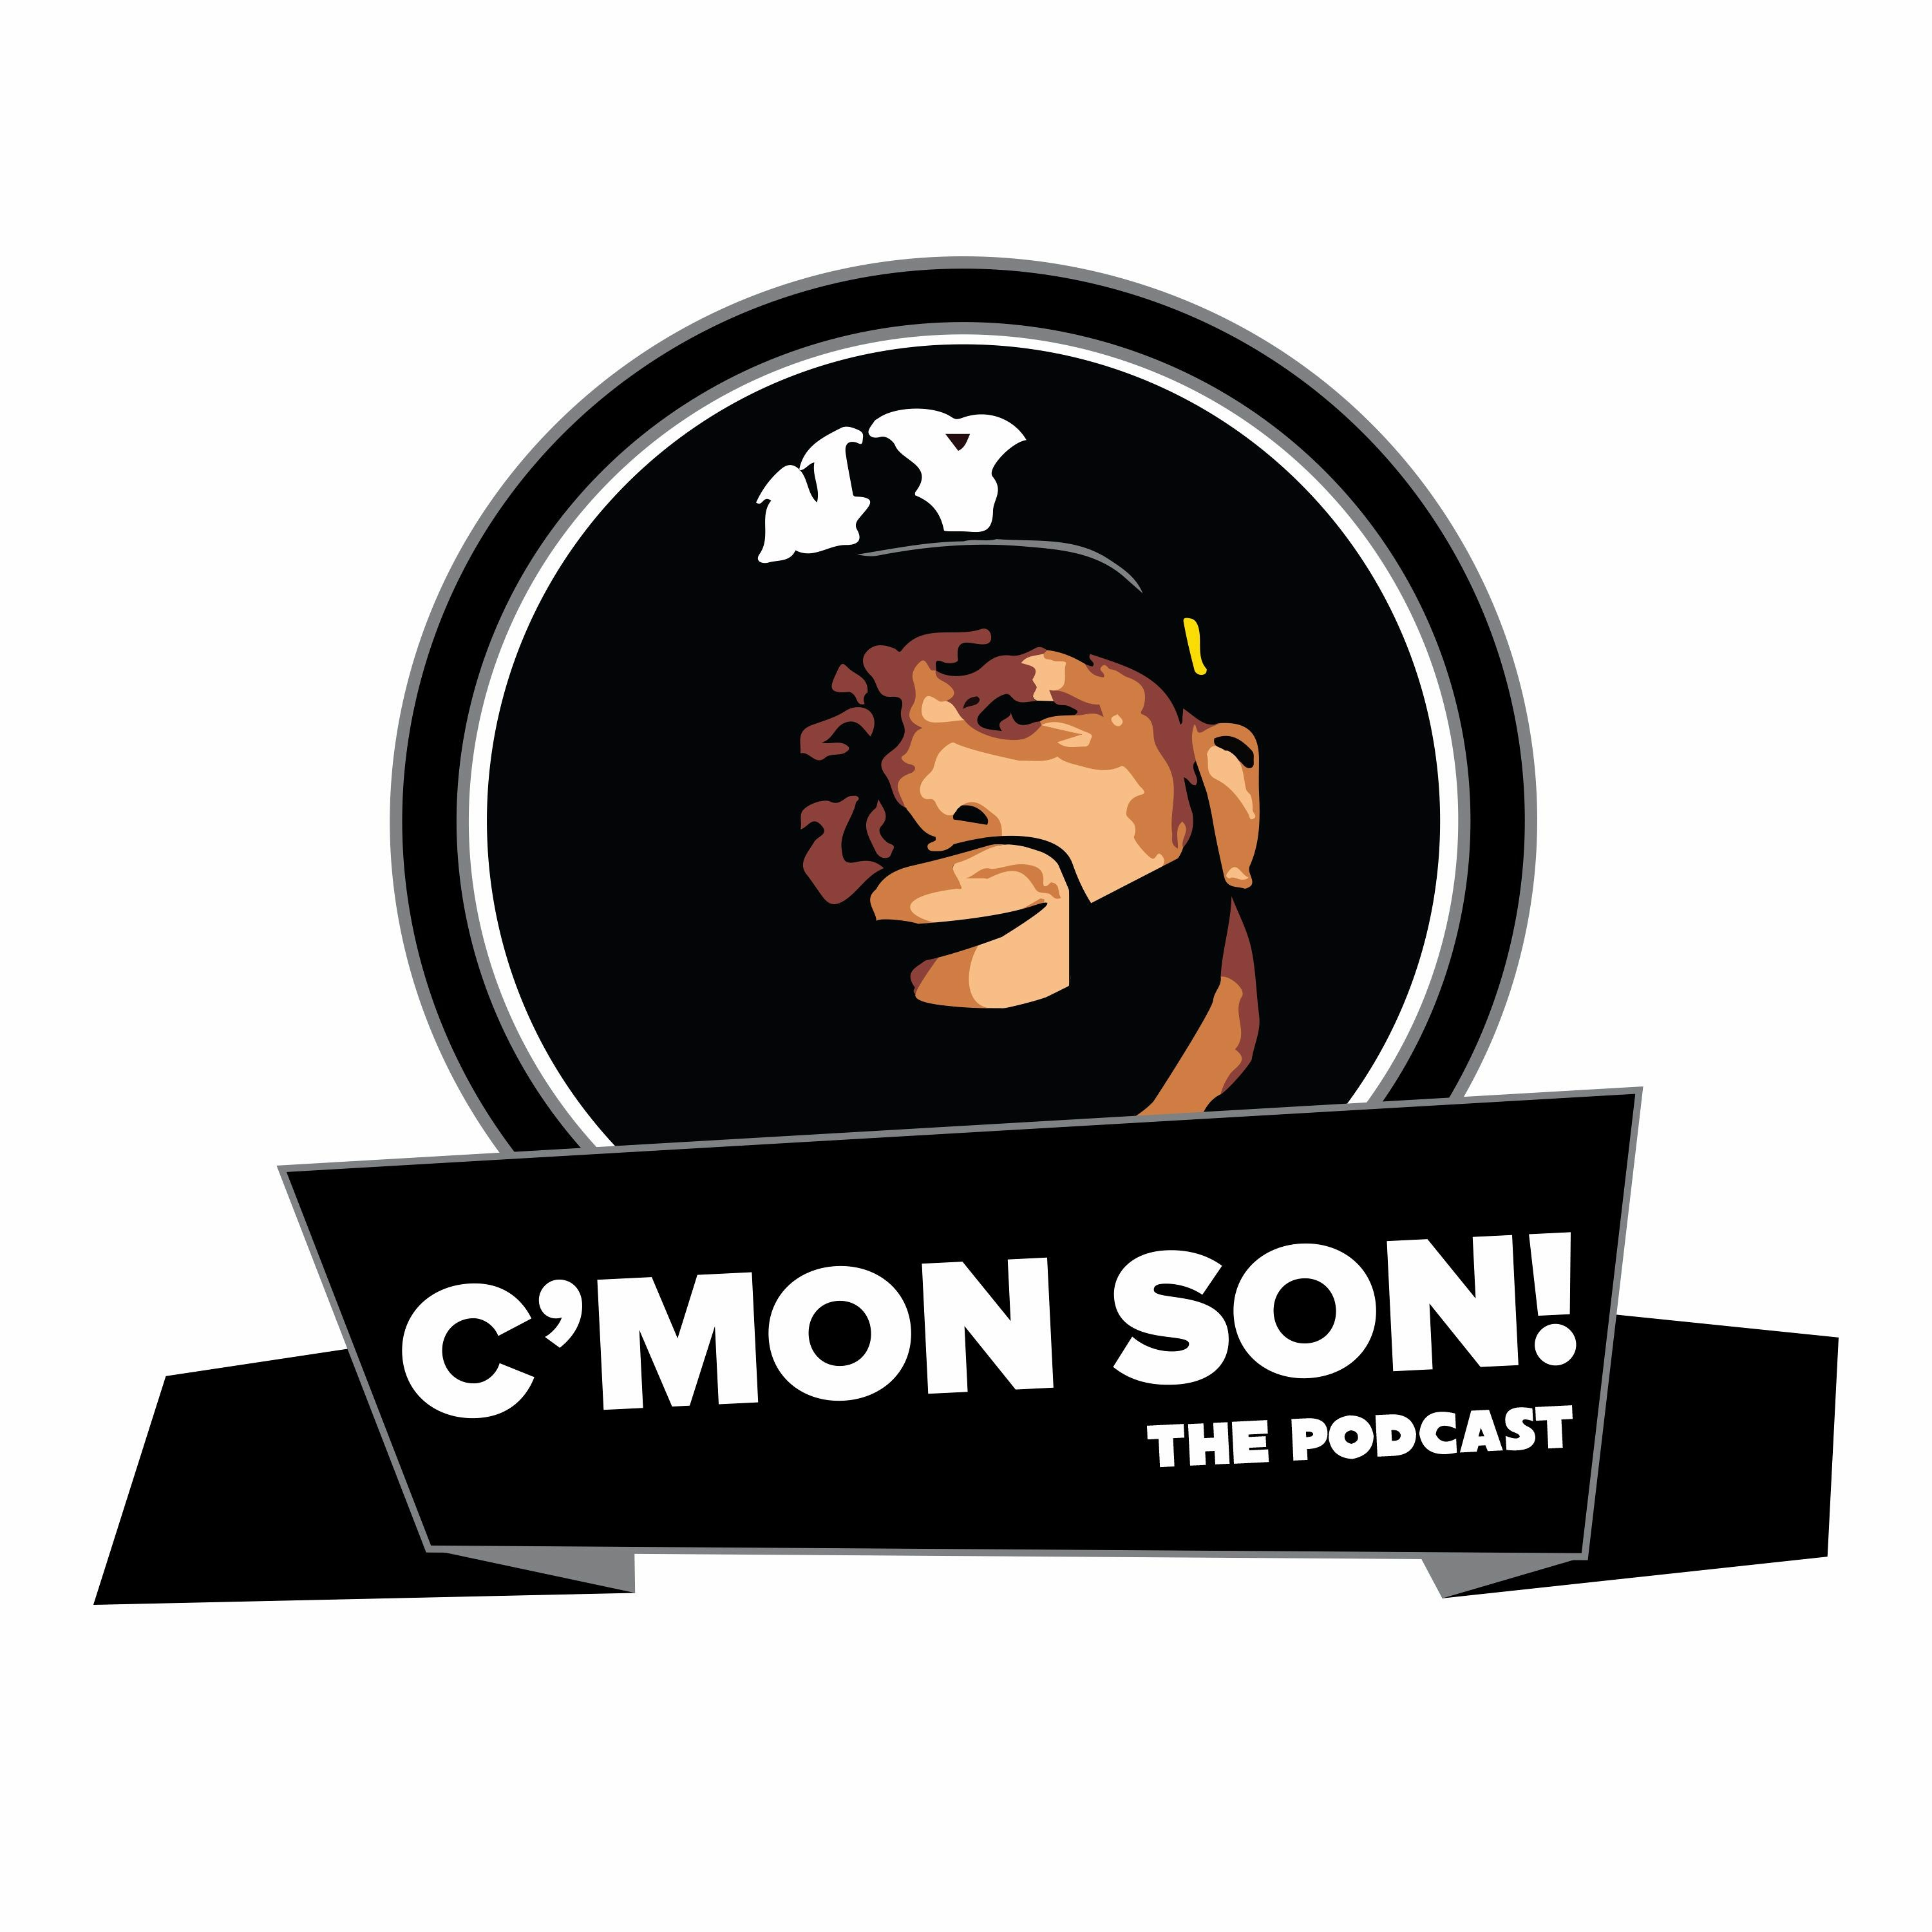 C'Mon Son! The Podcast Series #4 Episode #49: 112 and a cameo from Jasmine Guy